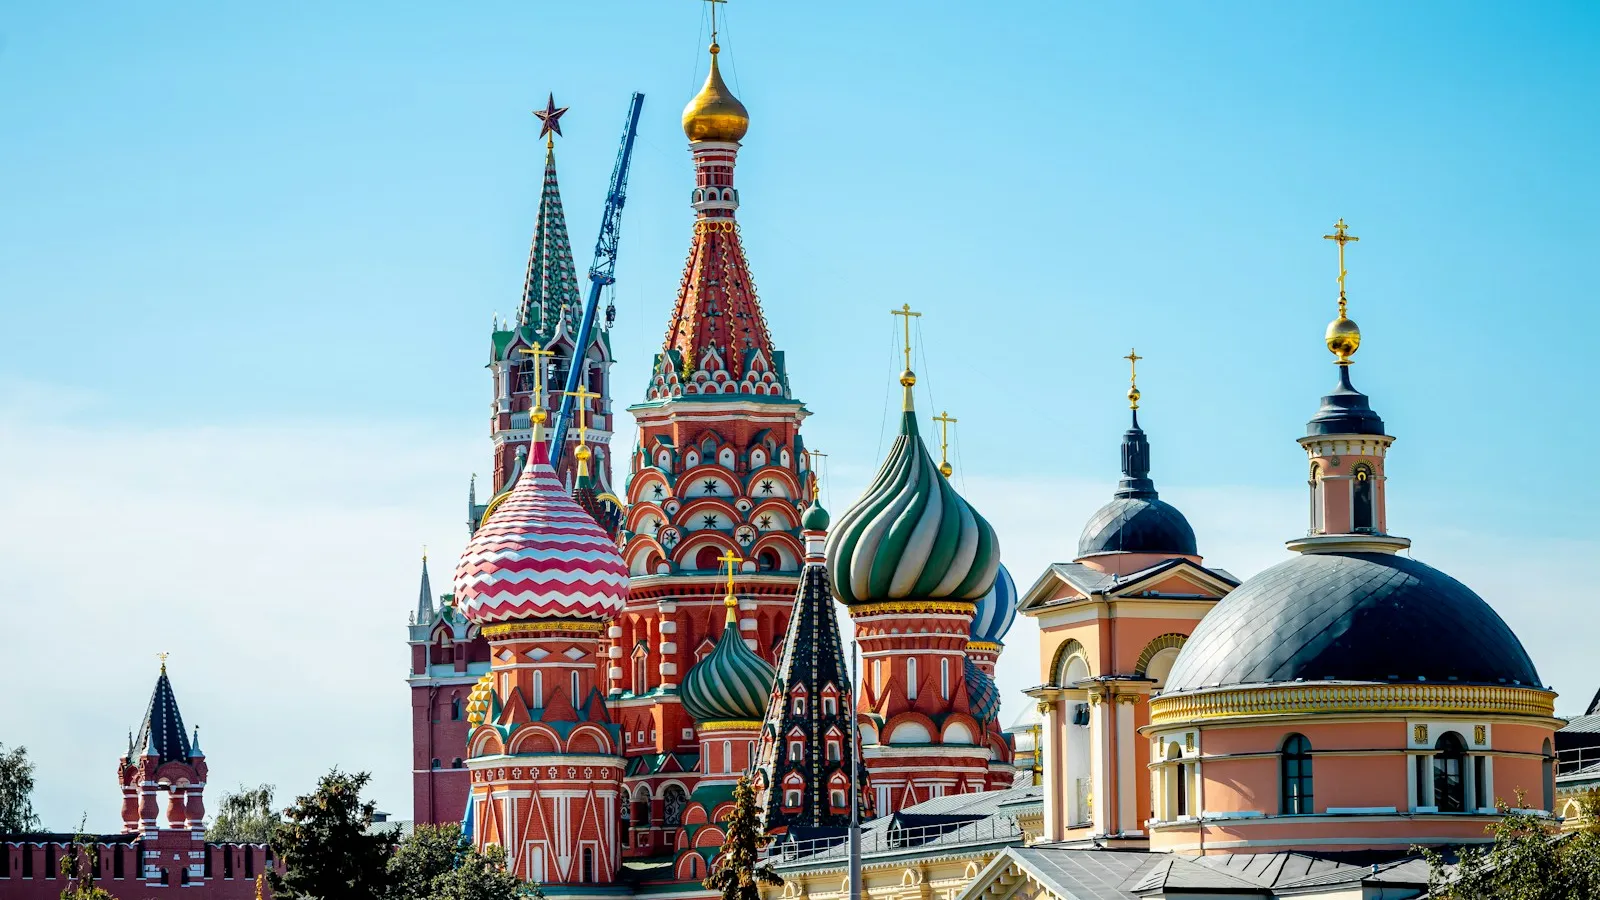 Moscow is a beautiful city, but also a hotspot for scams. Learn how to spot and avoid the top 10 scams in Moscow with this guide.